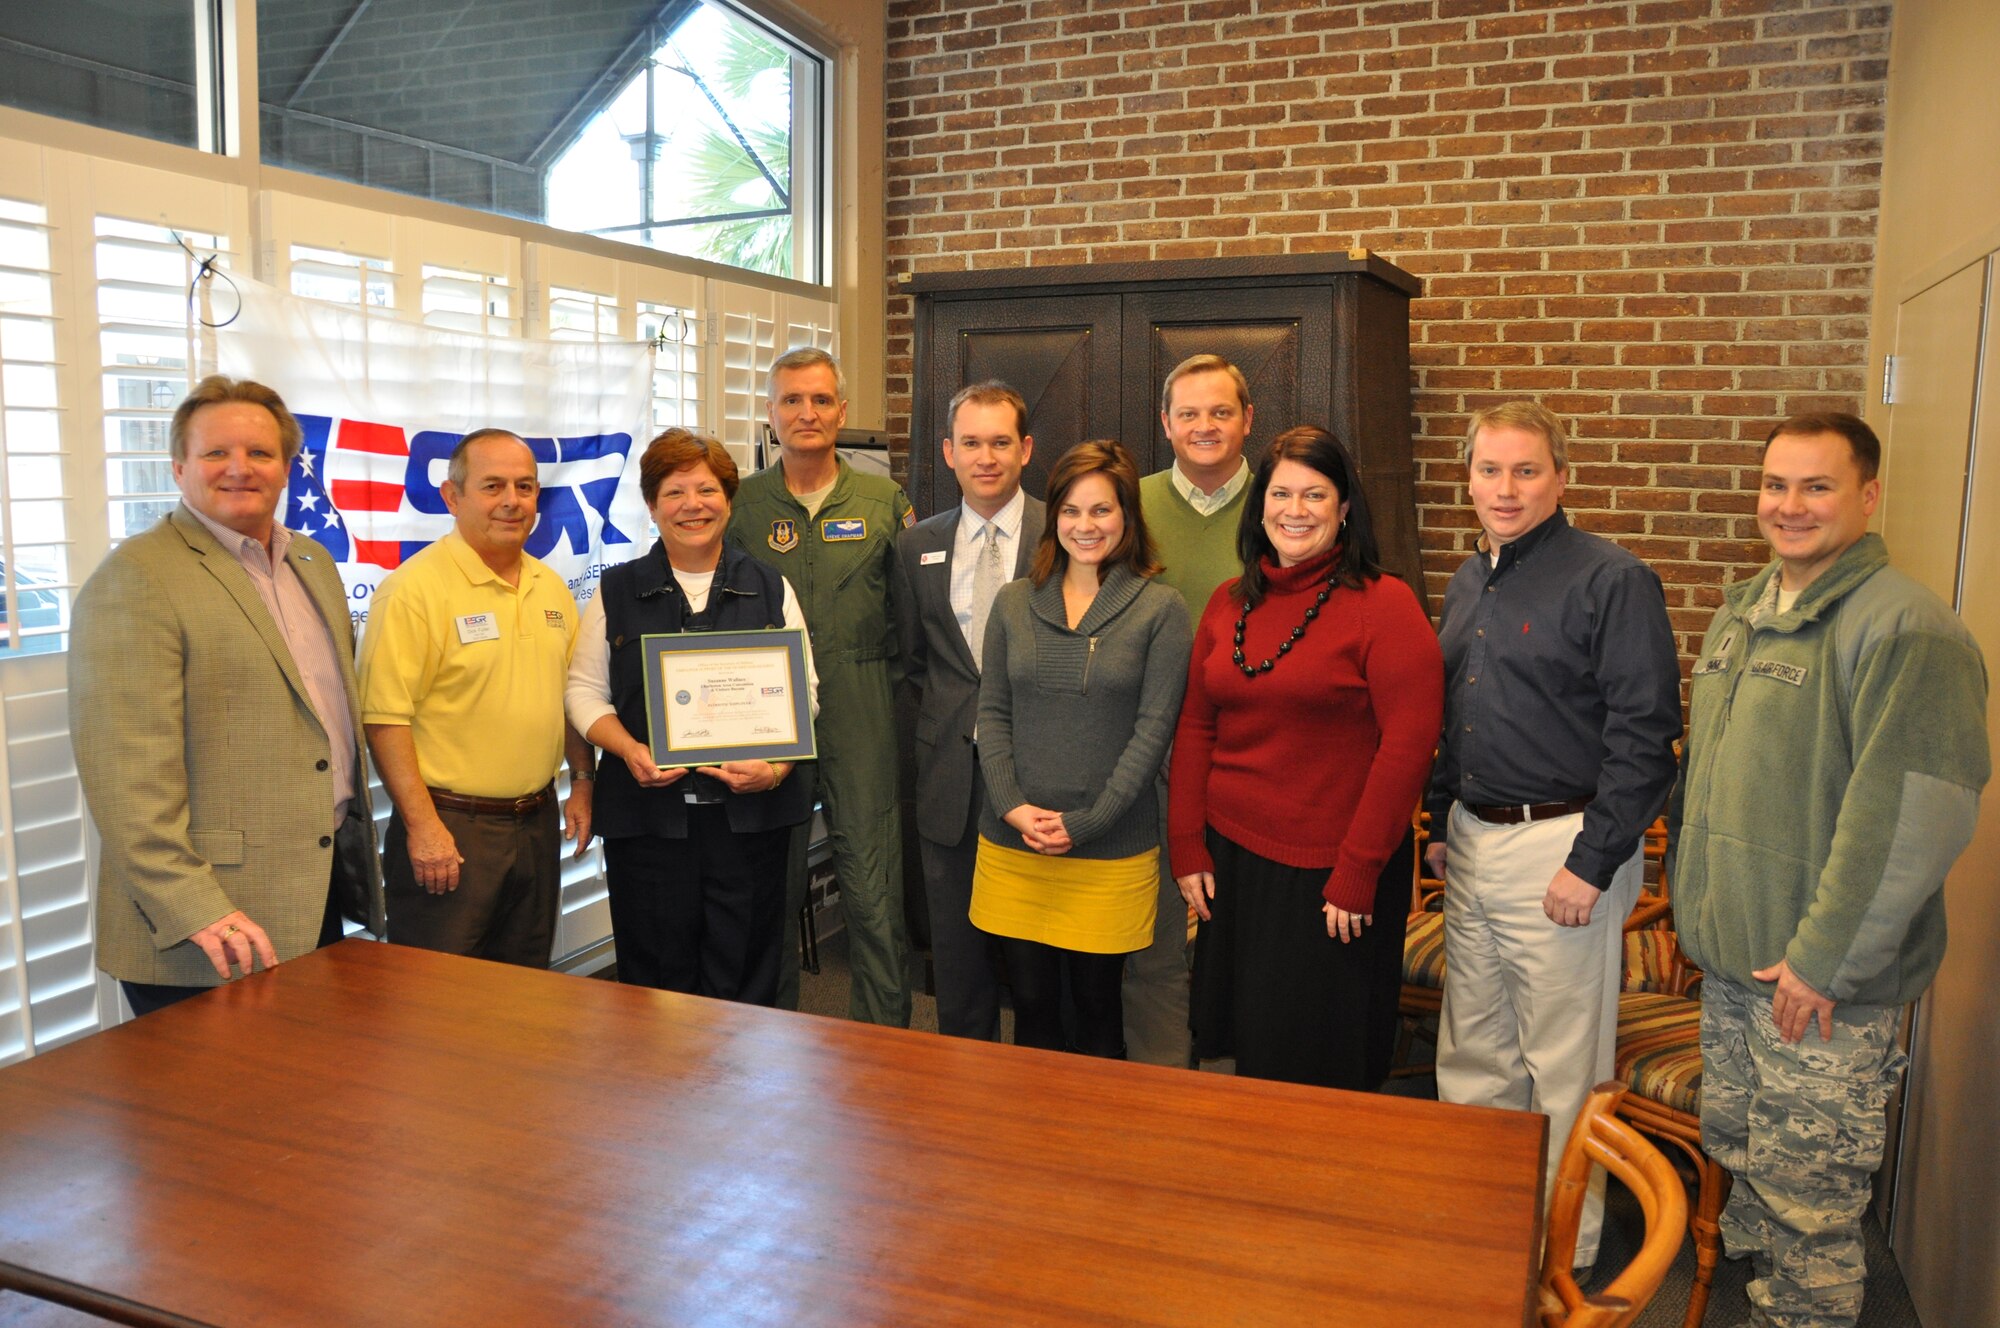 Col. Steven Chapman (center back), commander of the 315th Airlift Wing, presents Suzanne Wallace, director of the Charleston Area Convention and Visitors Bureau, with the Patriot Employer Award from the Employer Support of the Guard and Reserve.  She poses for the photo with members of the 315th Airlift Wing, ESGR committee members and members of the Charleston Area Convention and Visitors Bureau. (U.S. Air Force Photo/Capt. Wayne Capps)